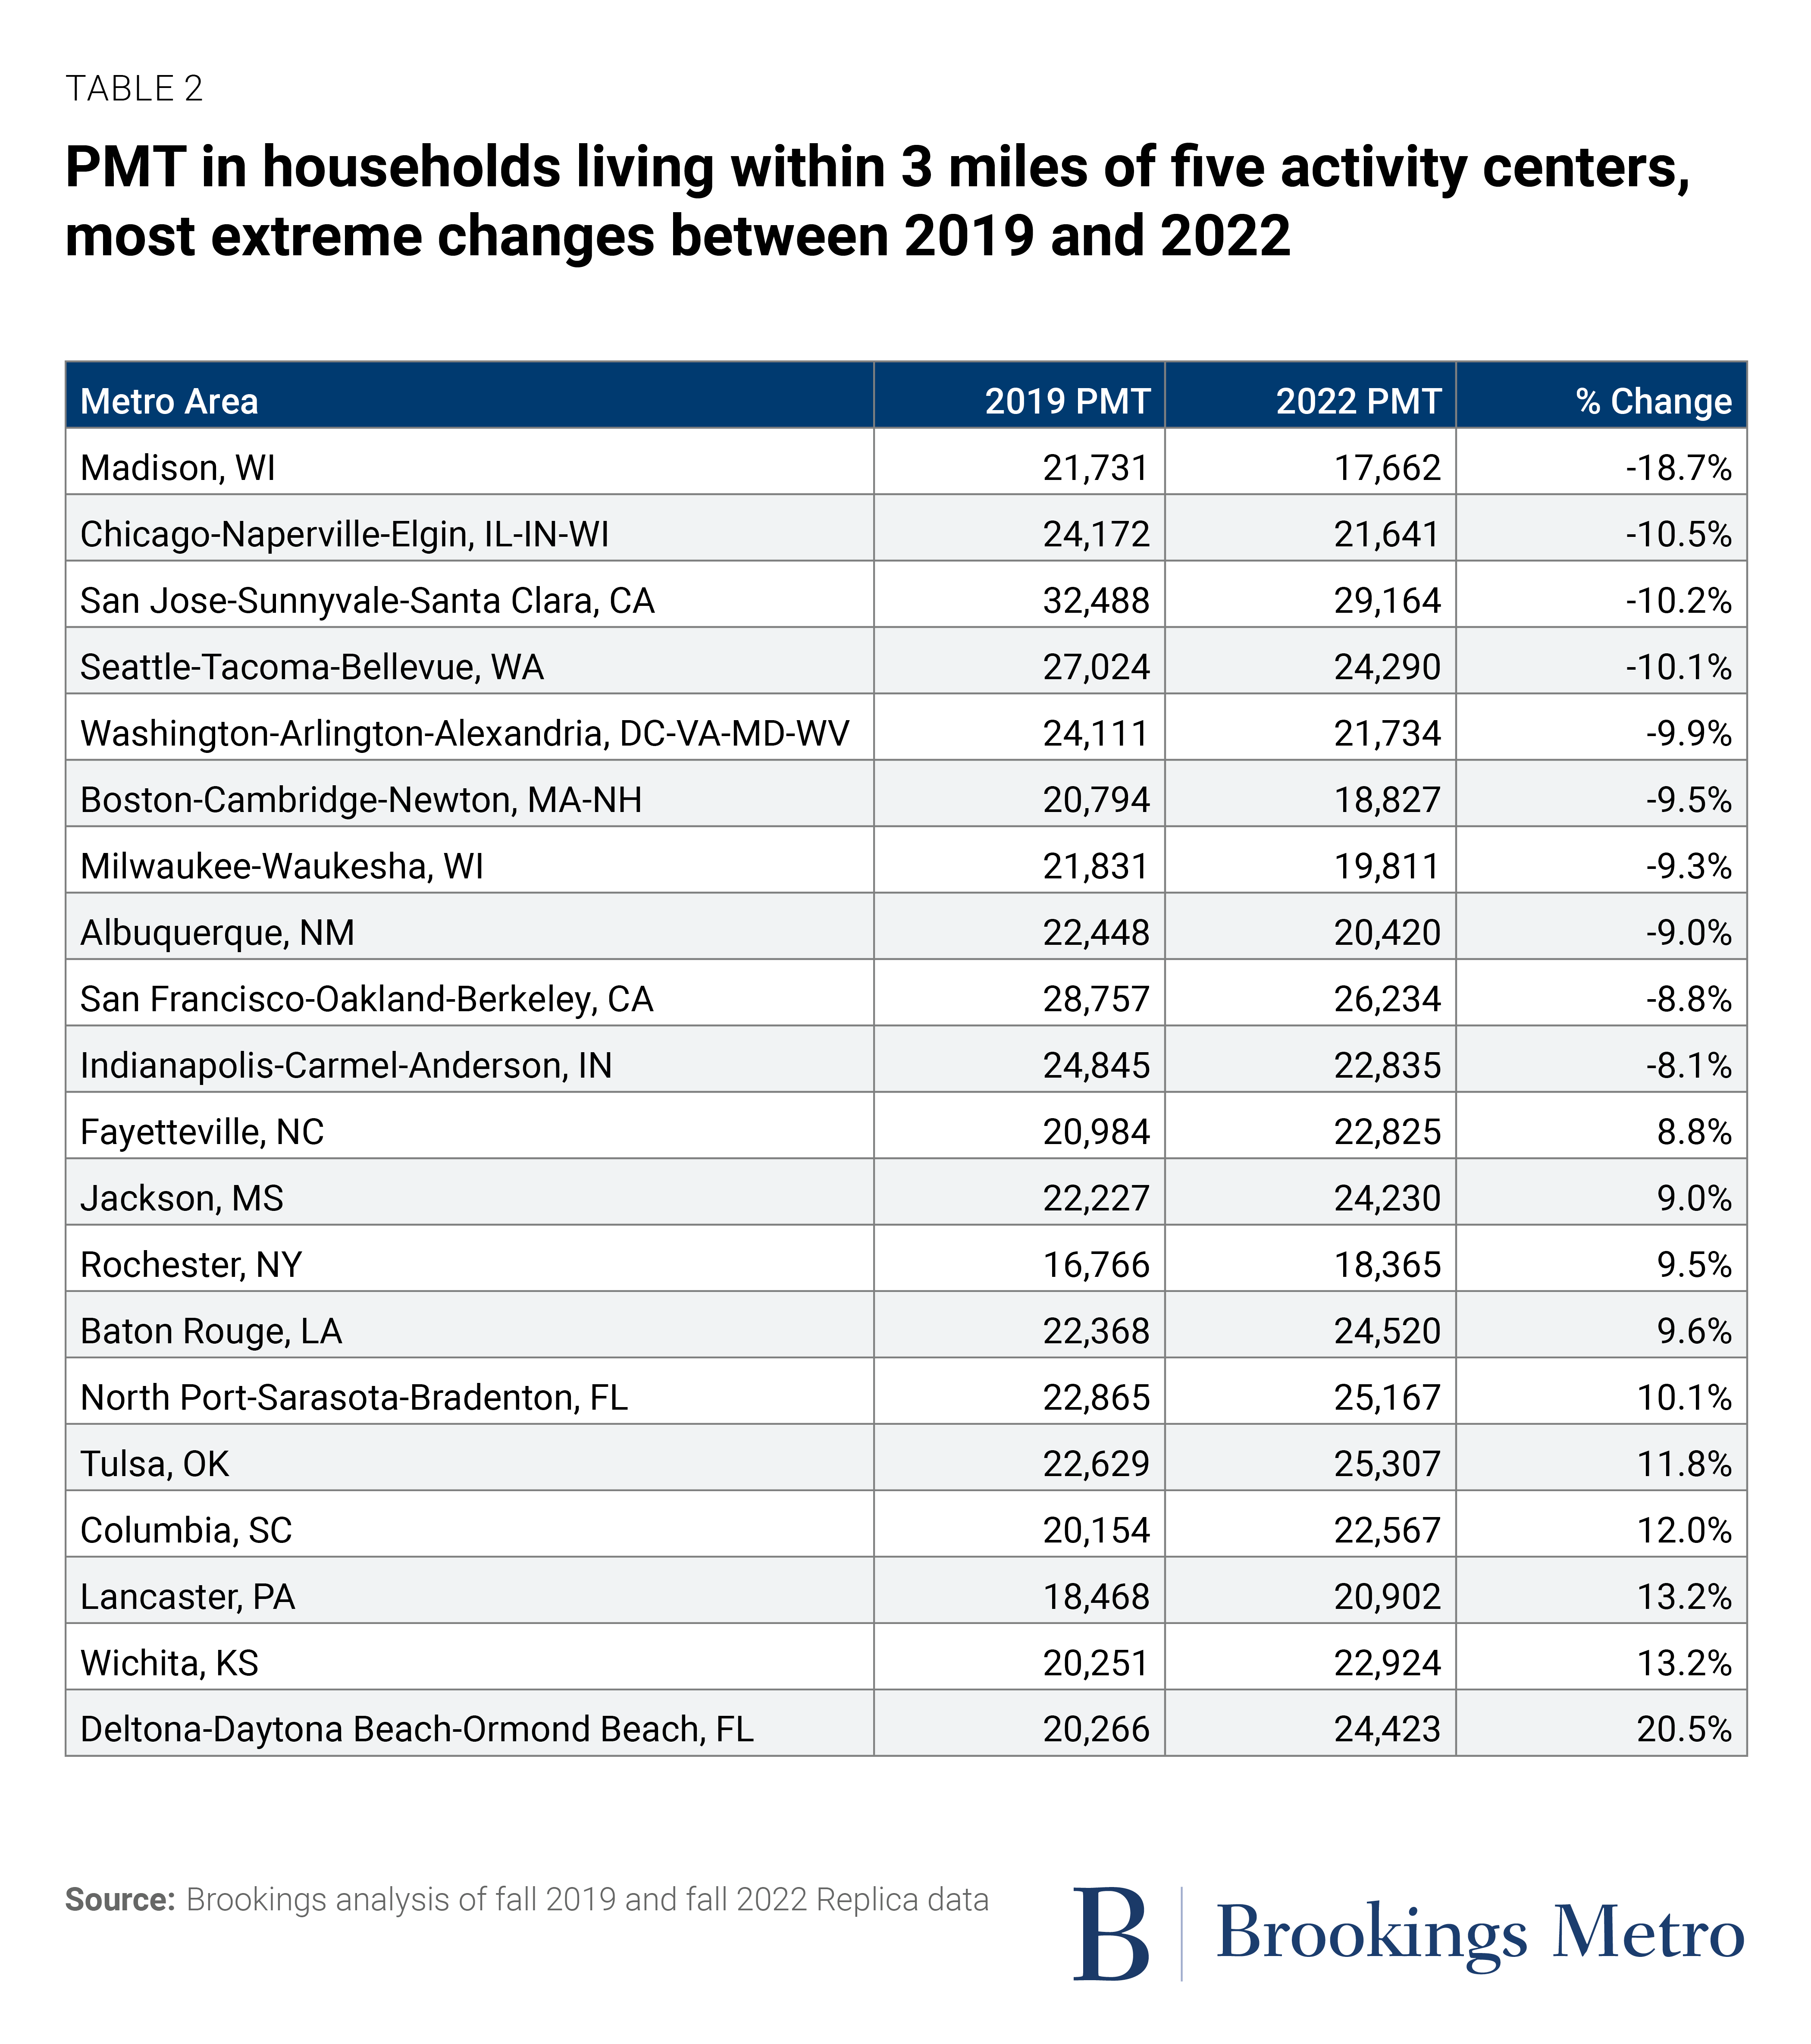 Table 2: PMT in households living within 3 miles of five activity centers, most extreme changes between 2019 and 2022